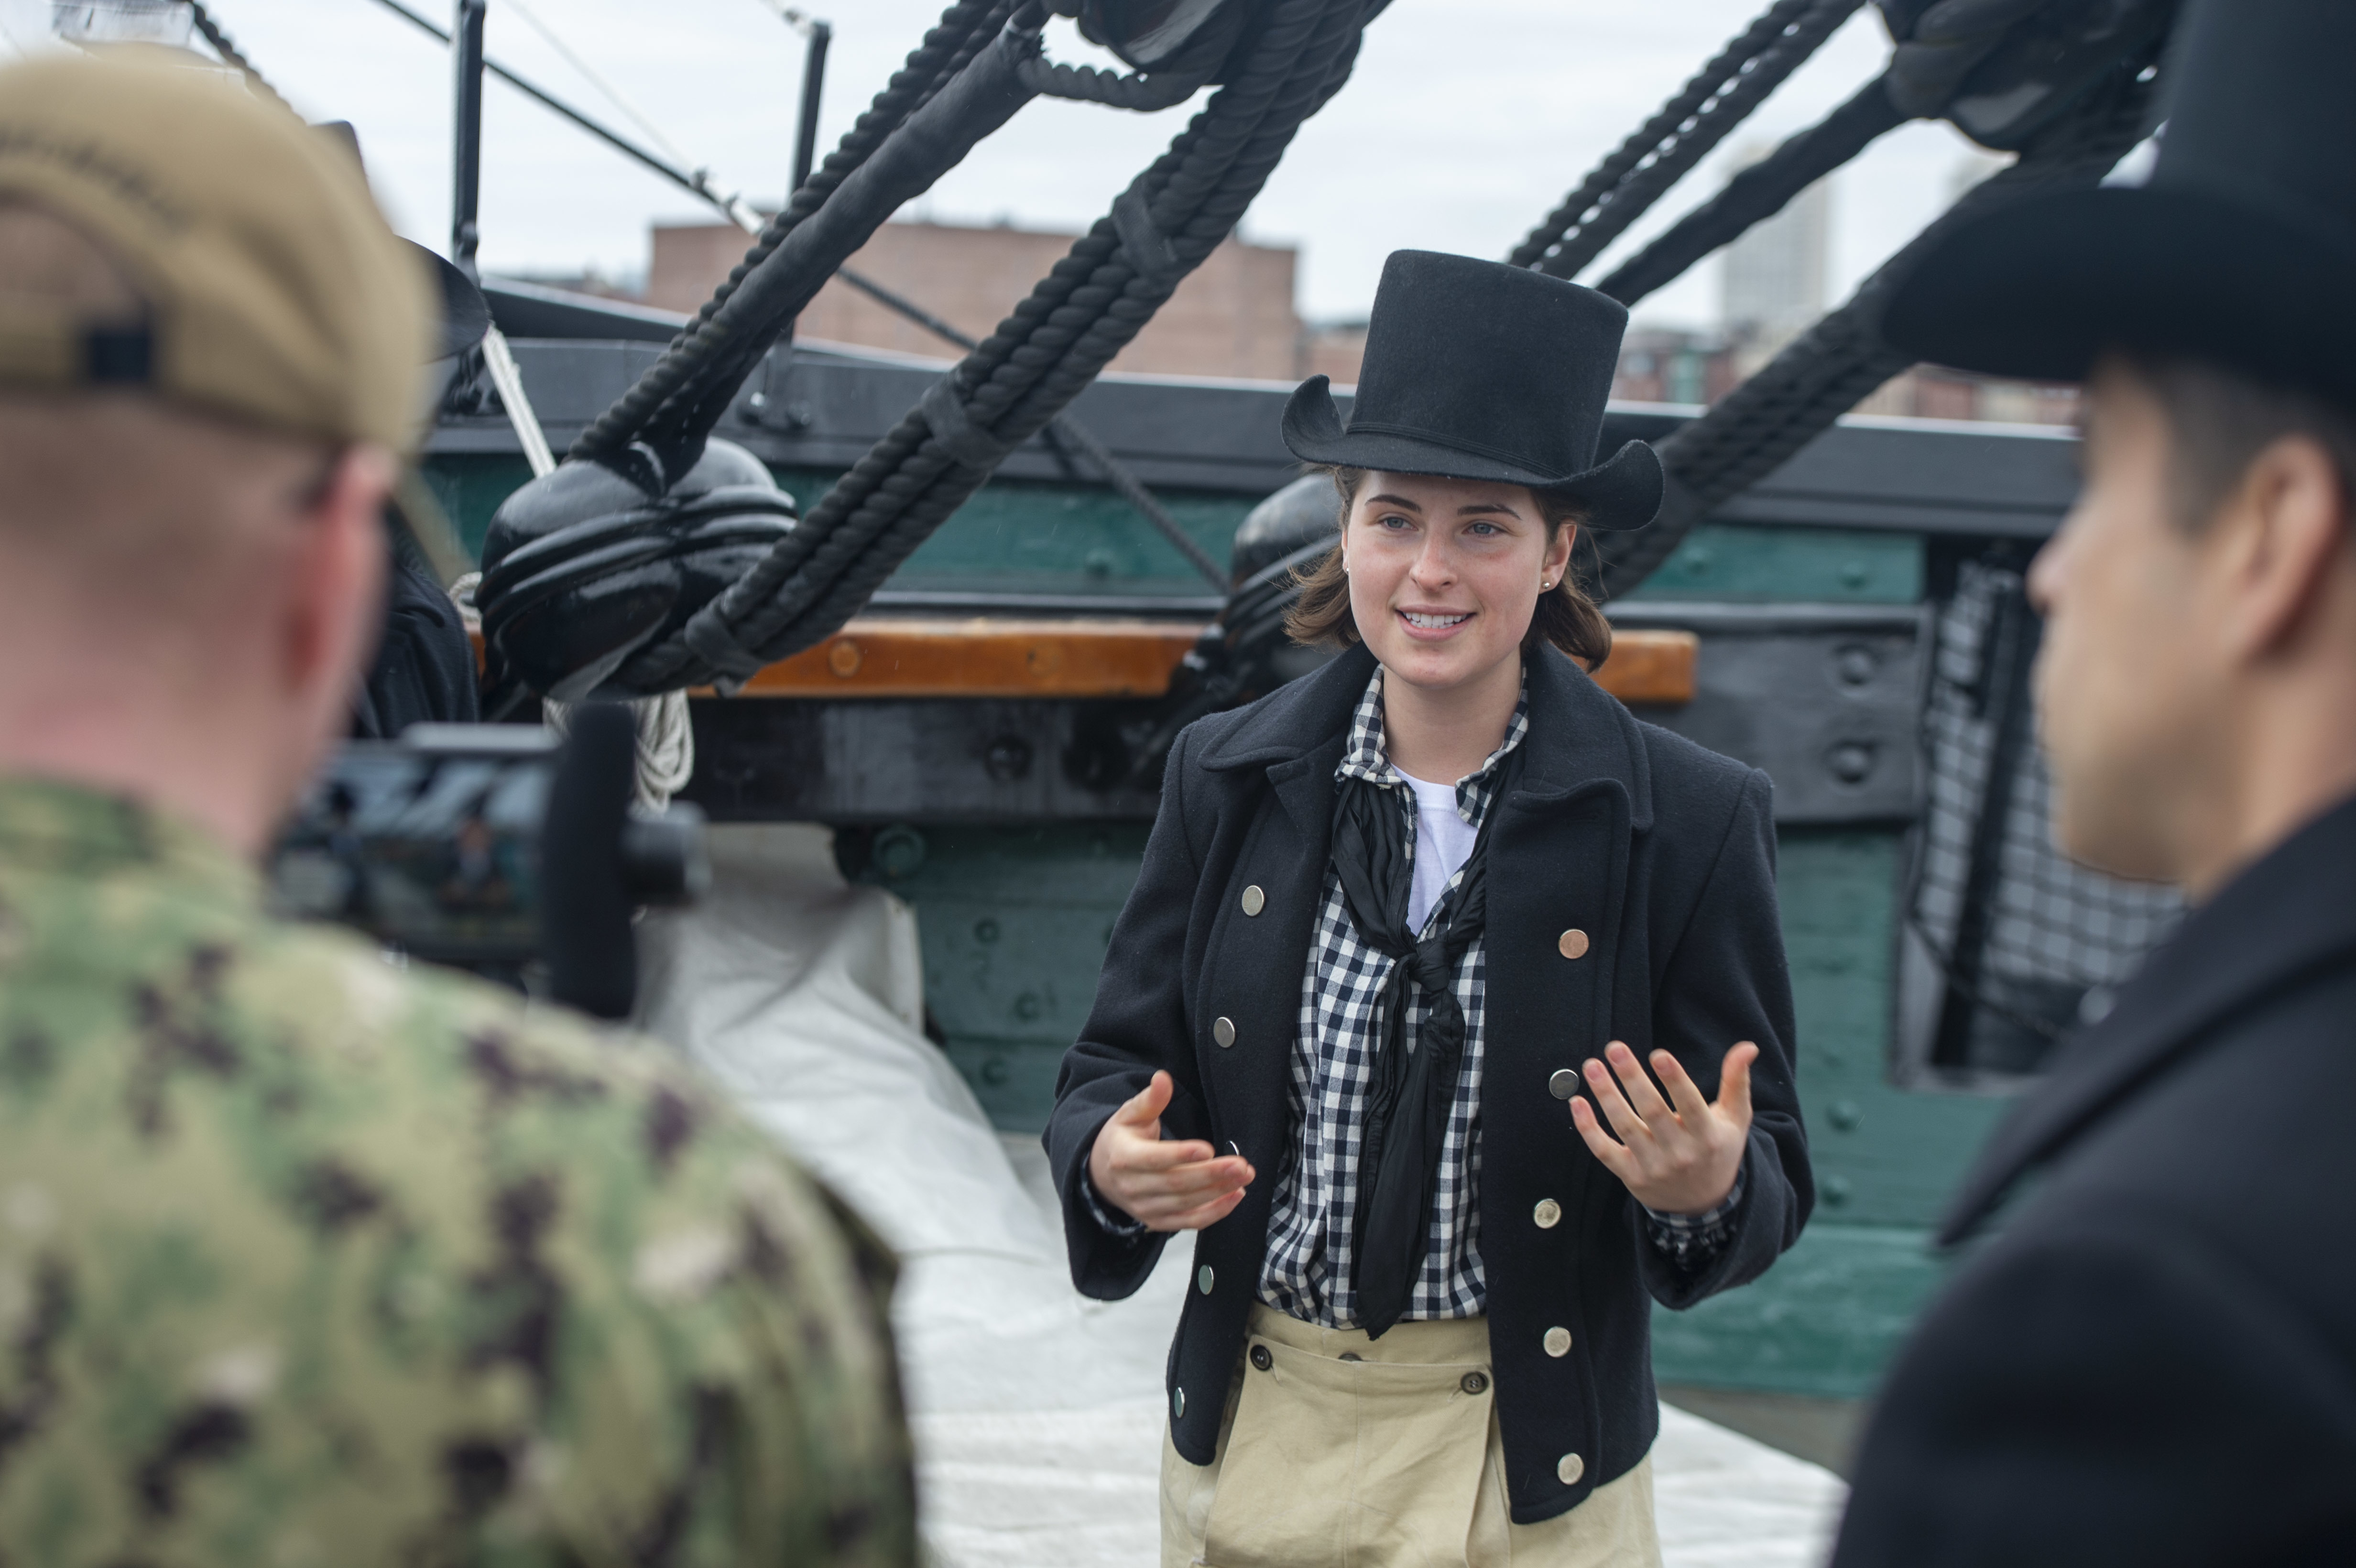 Photo captured Emma Hoernlein in her historic uniform, giving tour and explaining